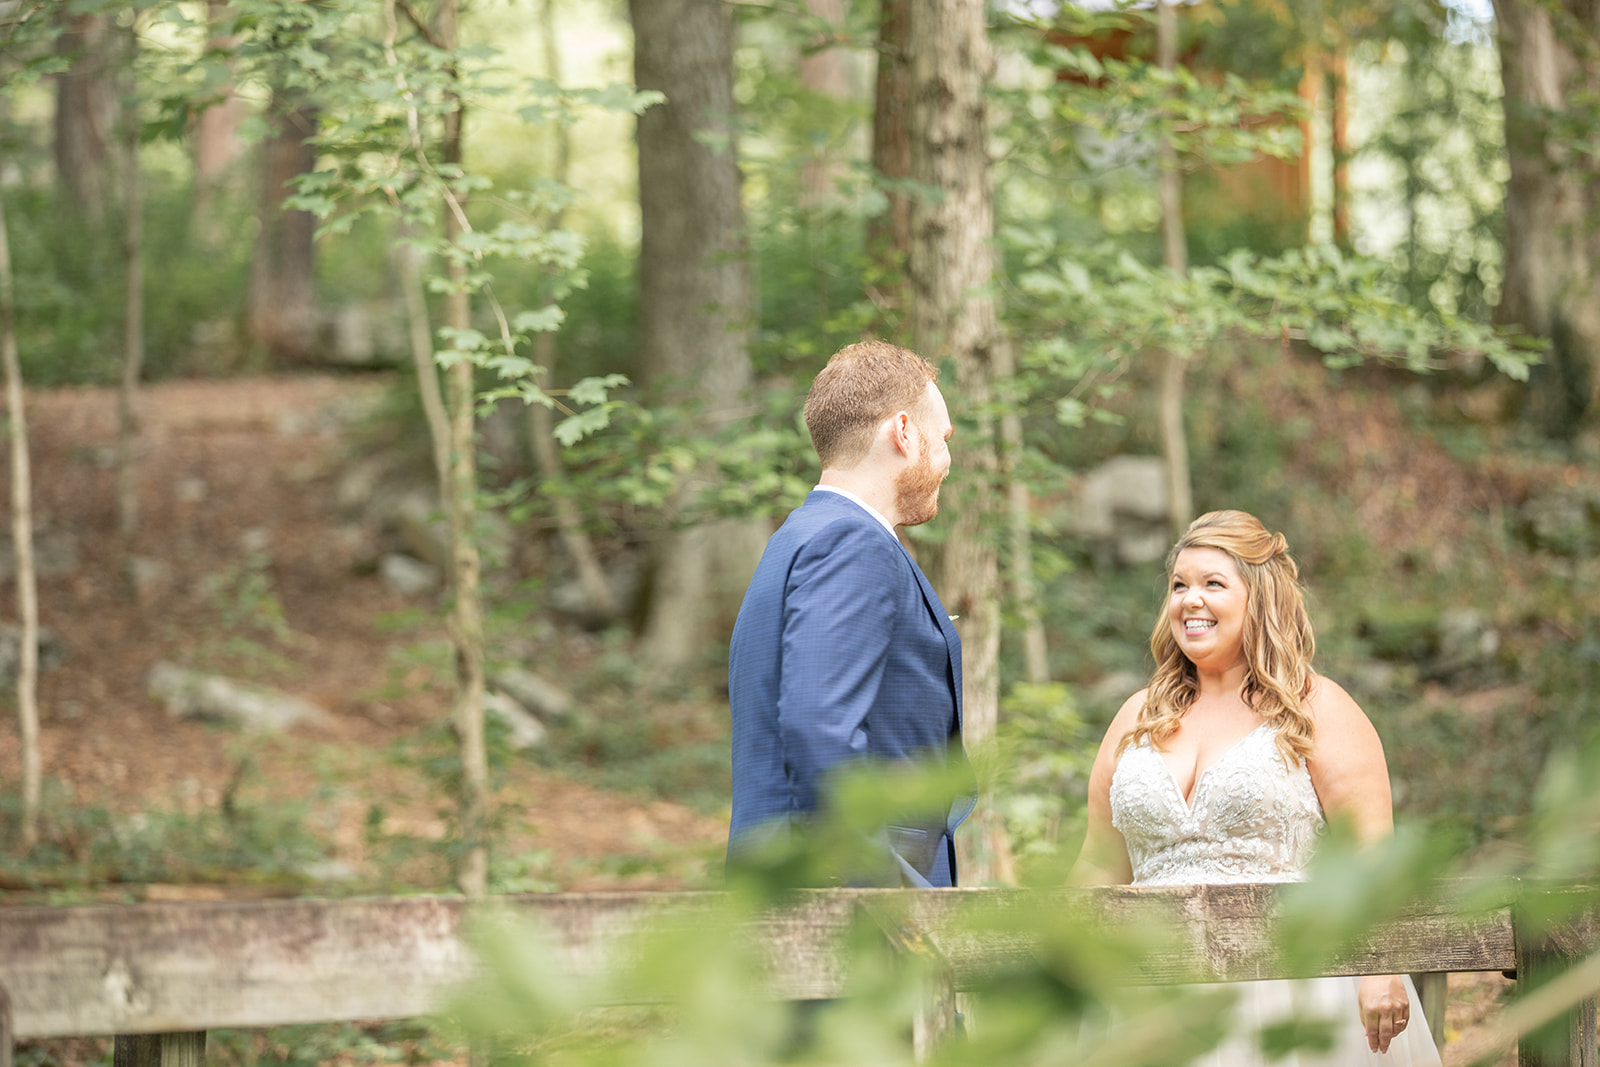 Charming, Rustic Wedding at the Cedars of Lebanon State Park featured on Nashville Bride Guide